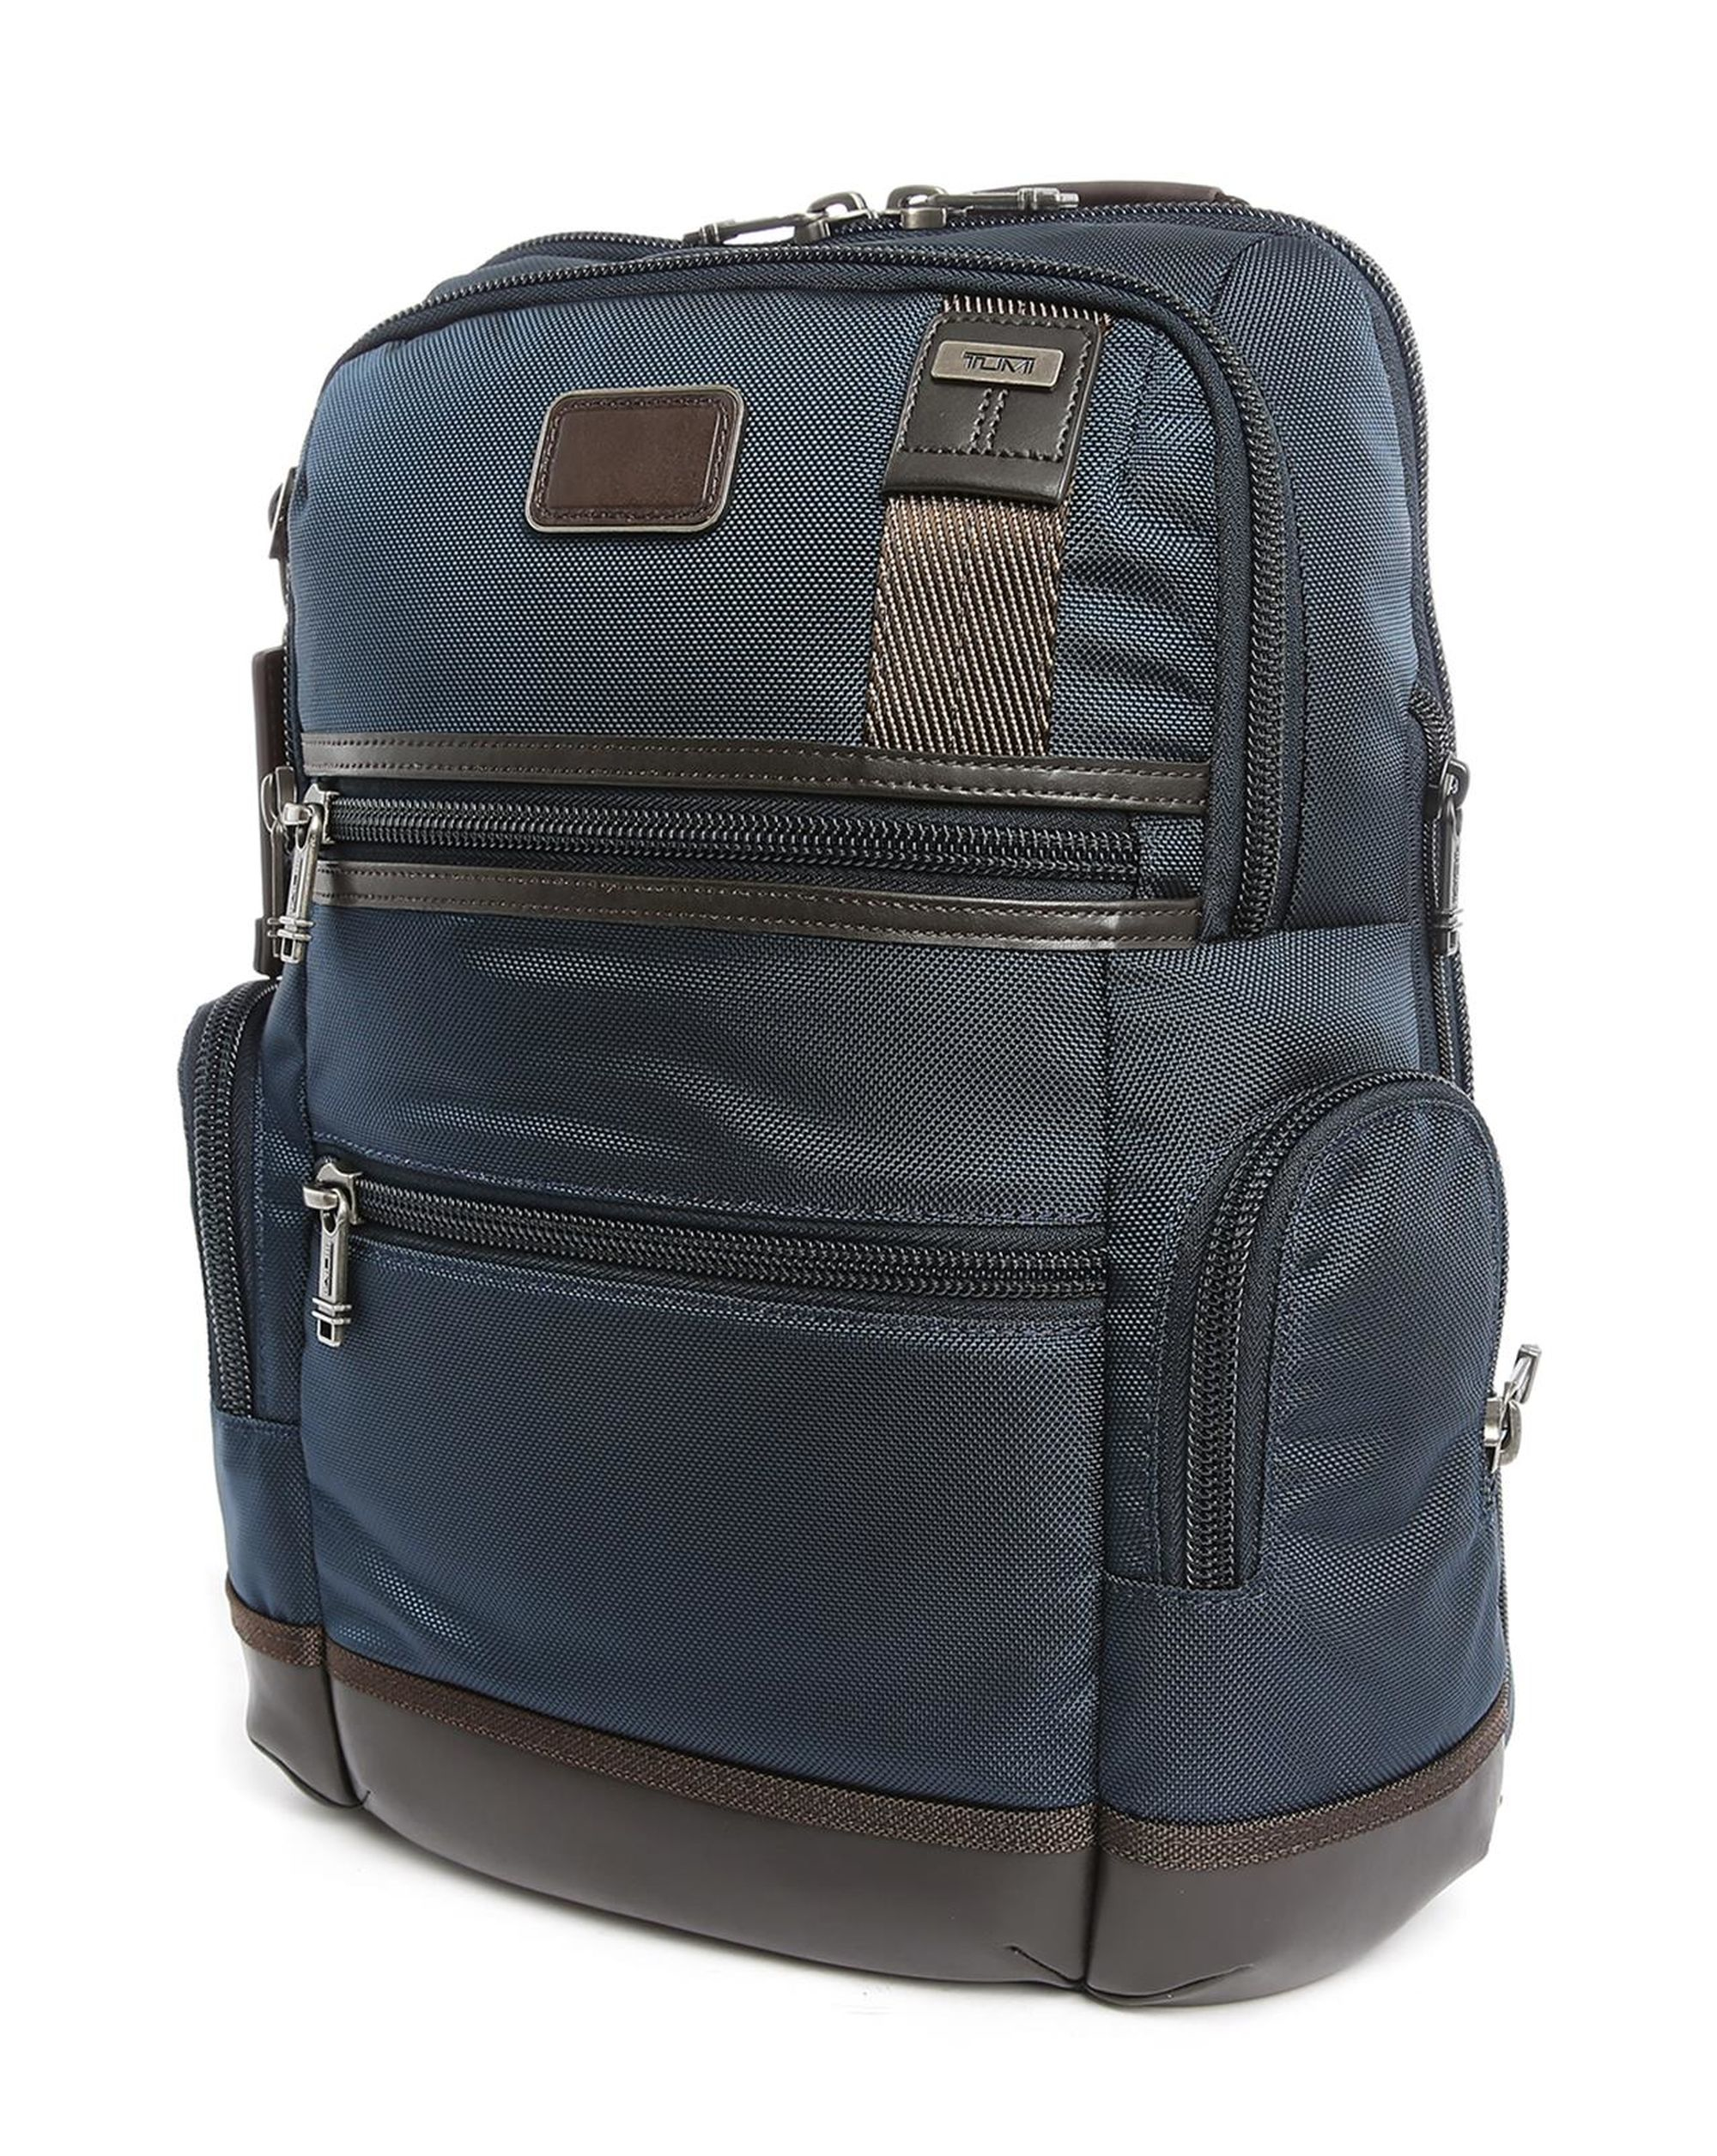 Tumi Blue Backpack. TUMI - Alpha Bravo Search Backpack - Laptop ...